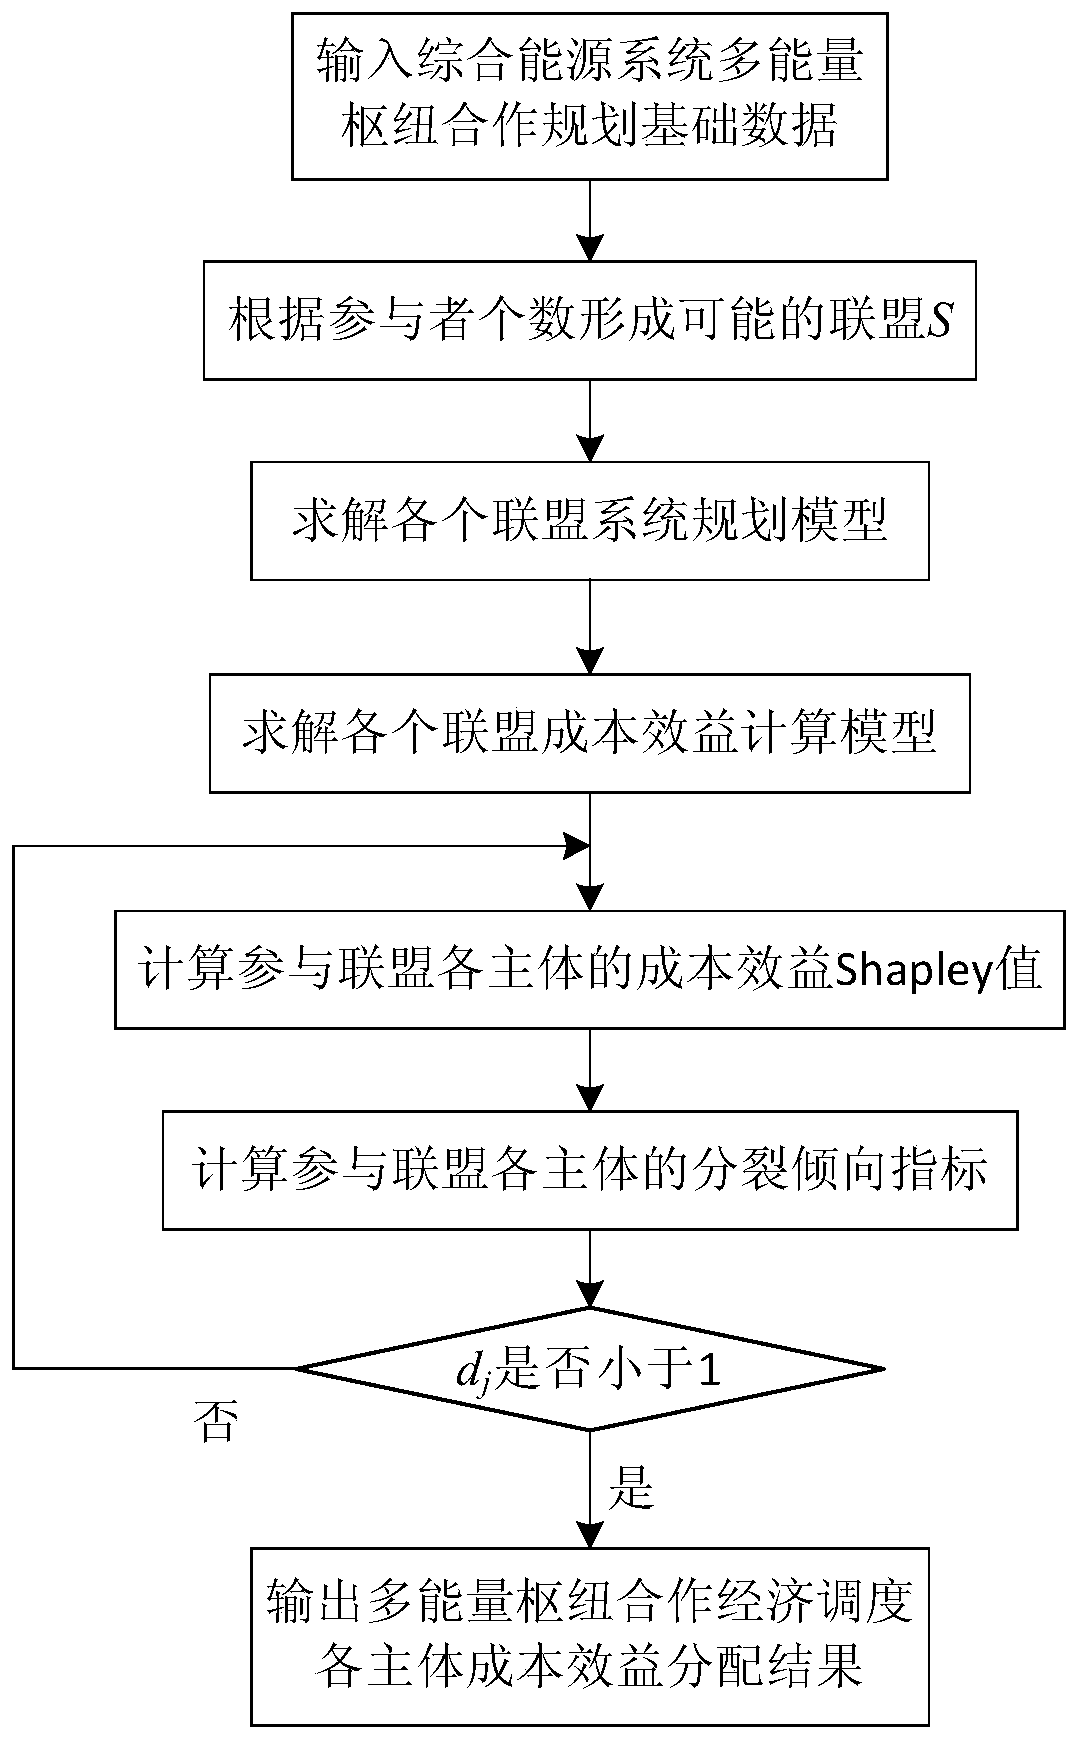 Multi-main-body cooperation optimization operation and cost benefit distribution method for comprehensive energy system